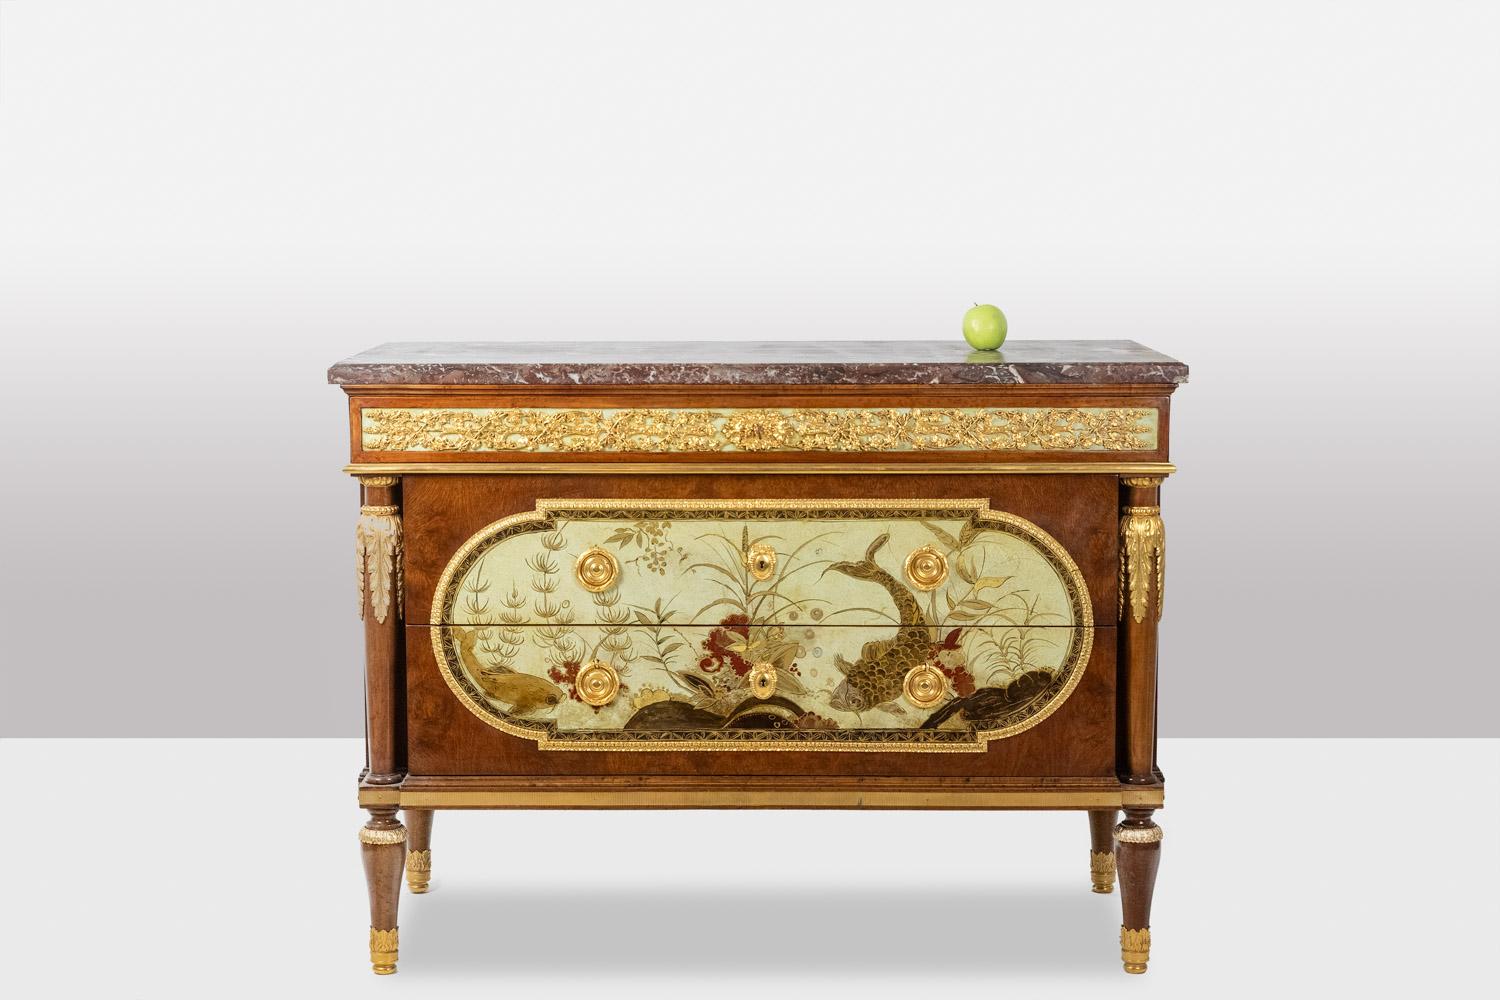 Bronze Empire style chest of drawers in lacquer, bronze and marble. Nineteenth century.